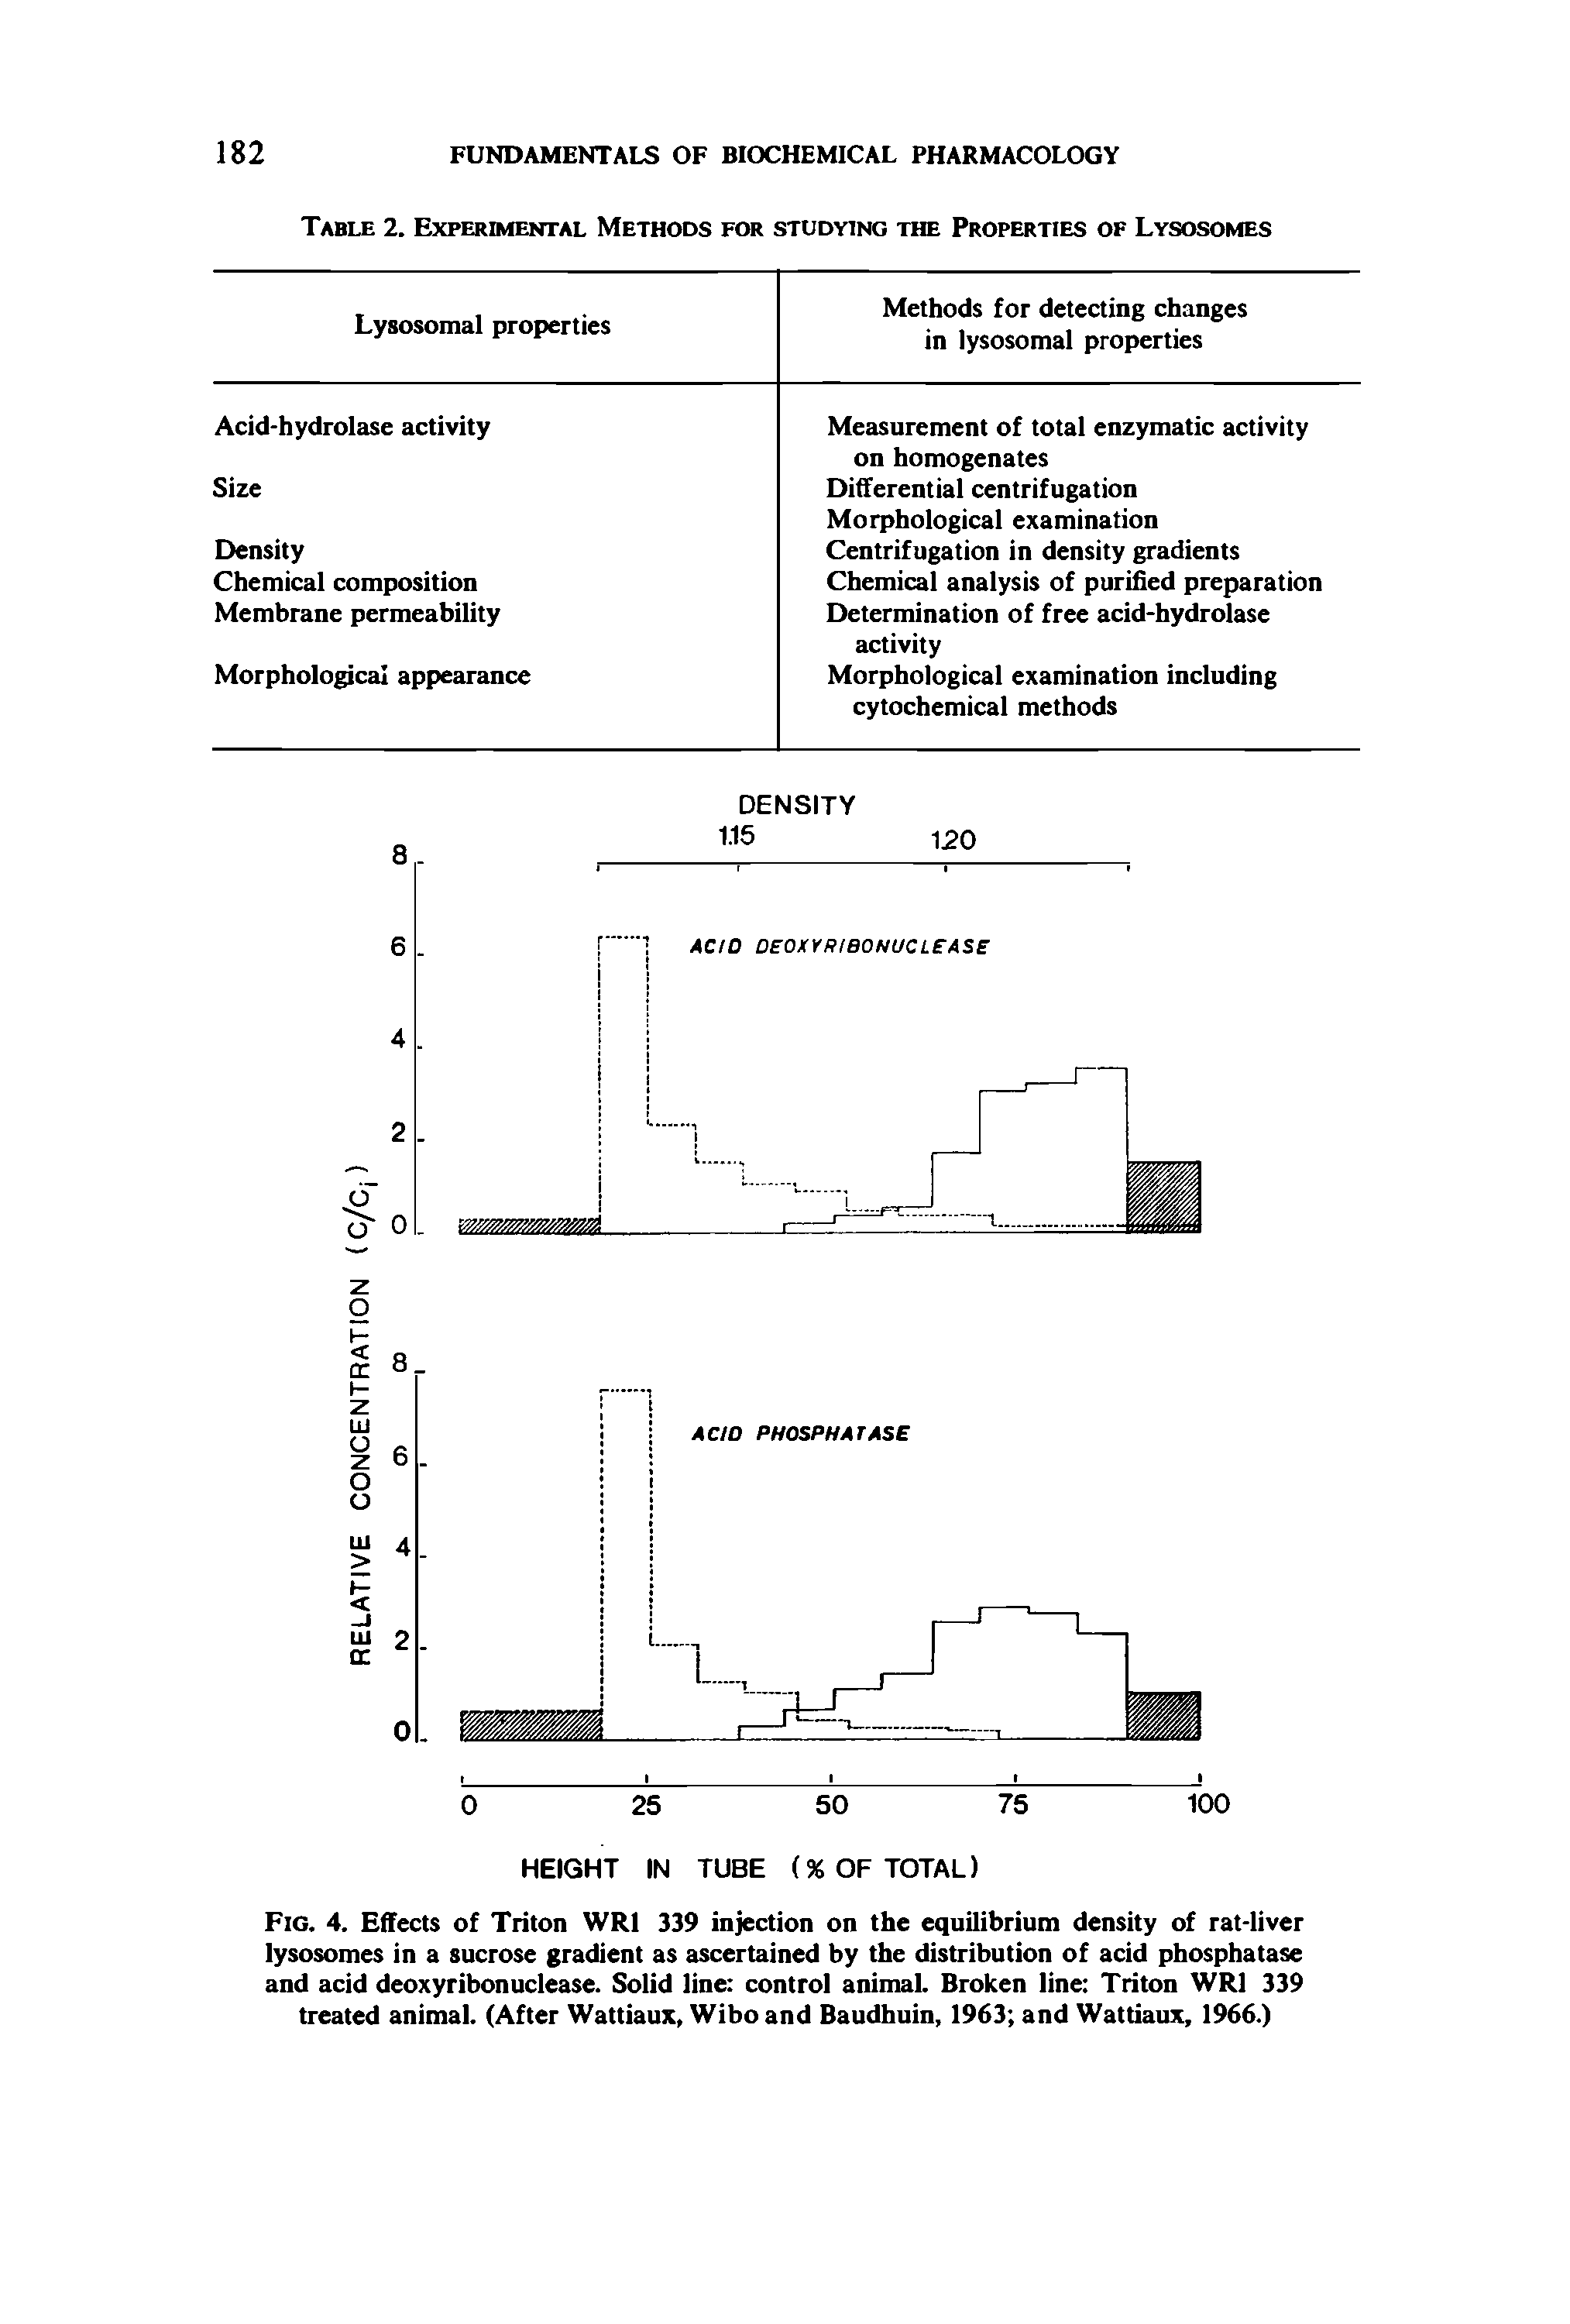 Fig. 4. EflFects of Triton WRl 339 injection on the equilibrium density of rat-liver lysosomes in a sucrose gradient as ascertained by the distribution of acid phosphatase and acid deoxyribonuclease. Solid line control animaL Broken line Triton WRl 339 treated animal. (After Wattiaux, Wibo and Baudhuin, 1963 and Wattiaux, 1%6.)...